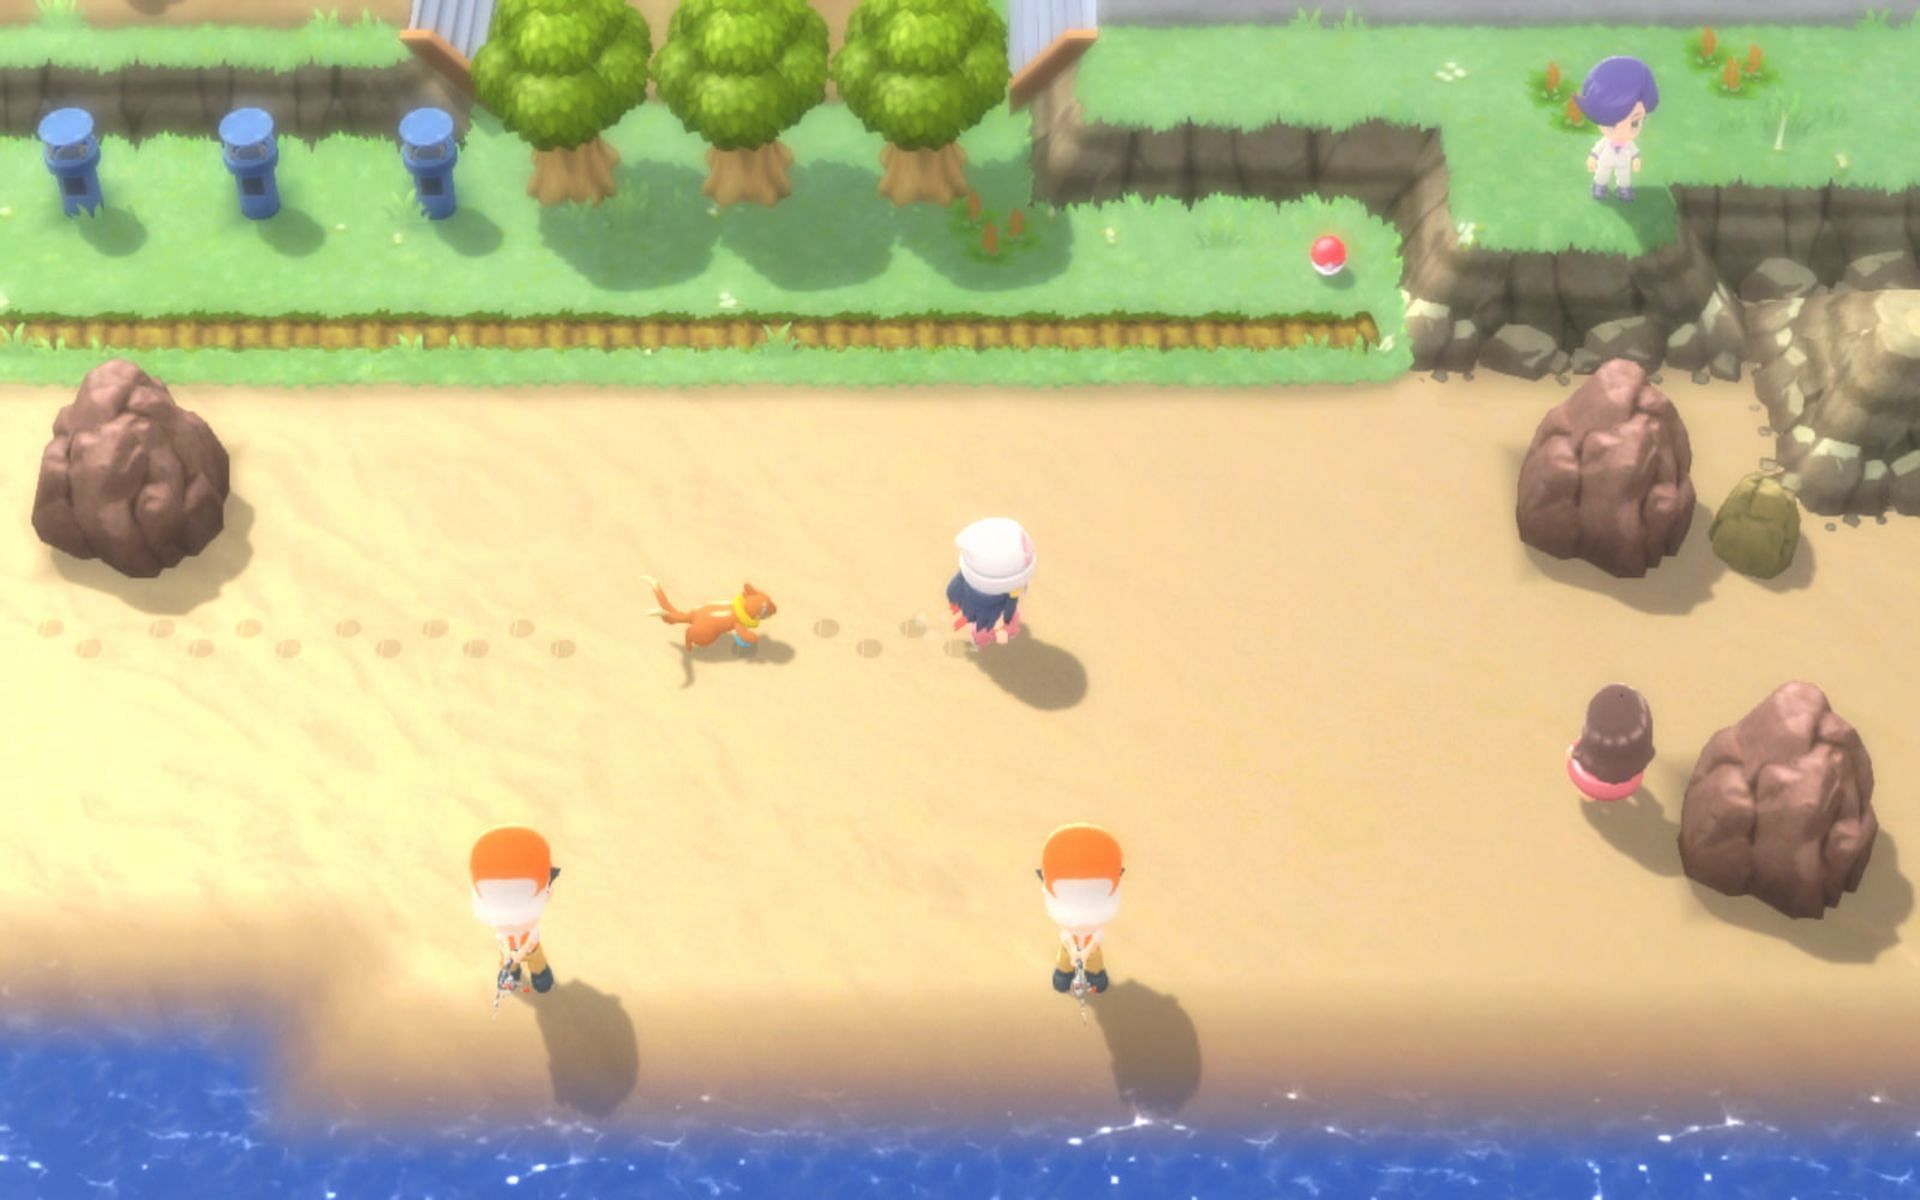 Pokemon can walk outside their PokeBall in this game (Image via The Pokemon Company)